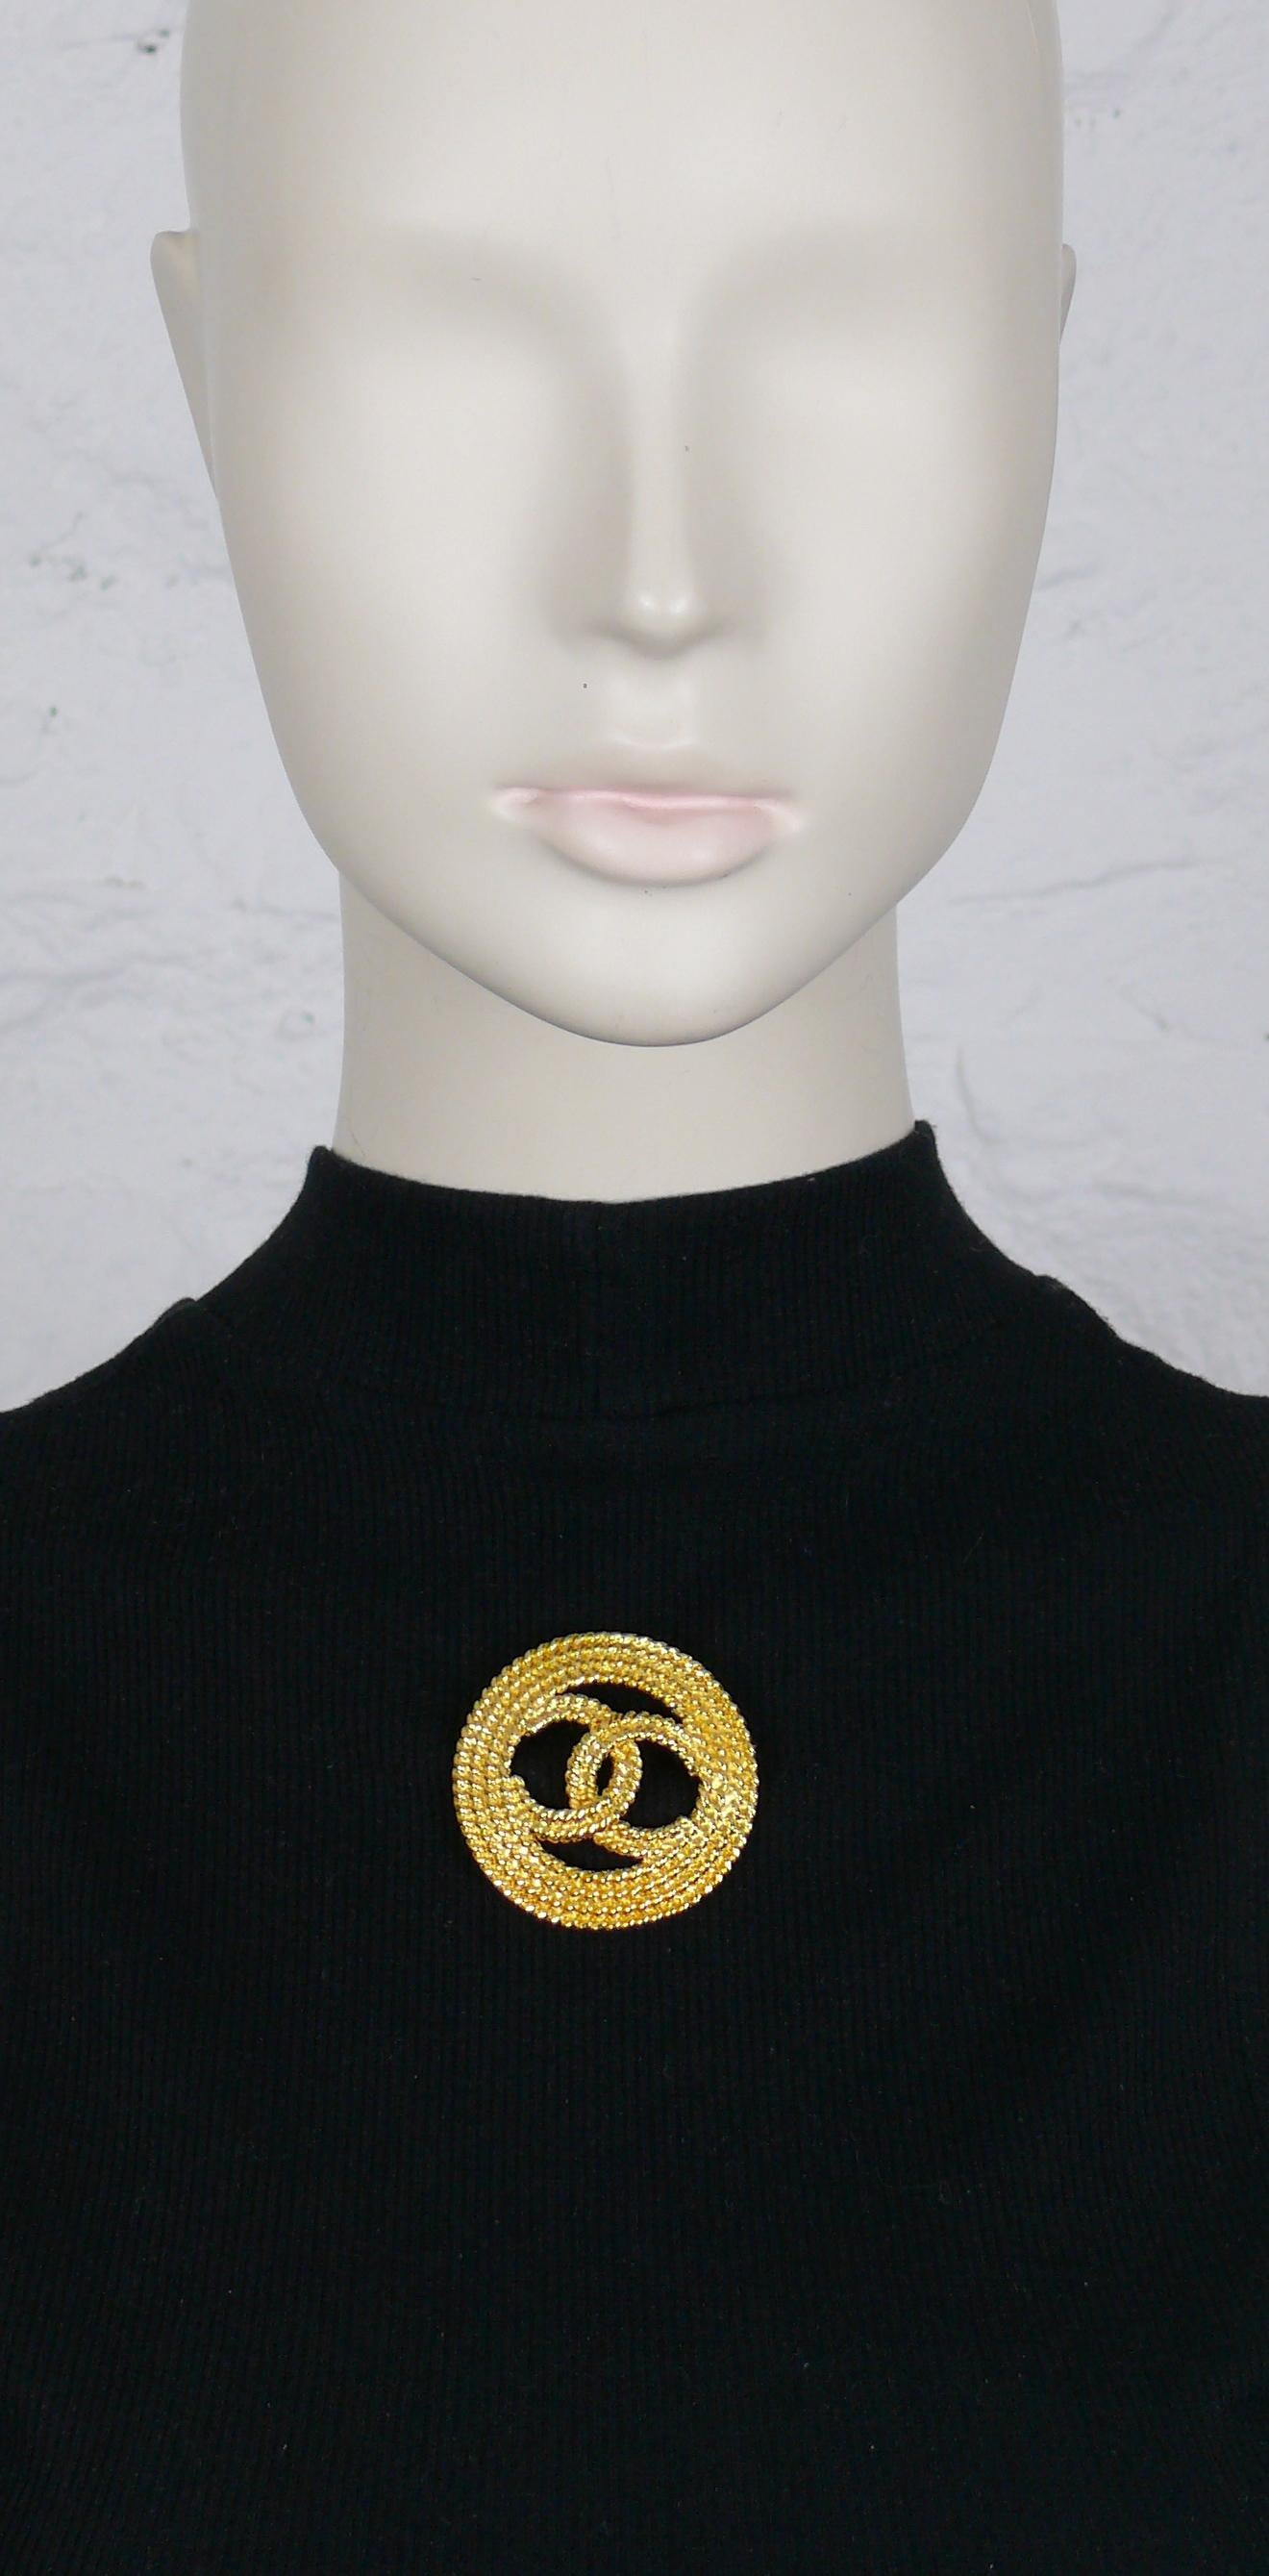 CHANEL vintage gold toned rope design brooch featuring CC logo at the center.

Collection N°28 (year : 1993).

Embossed CHANEL 2 8 Made in France.

Indicative measurements : diameter approx. 4.7 cm (1.85 inches).

Comes with the original box (used